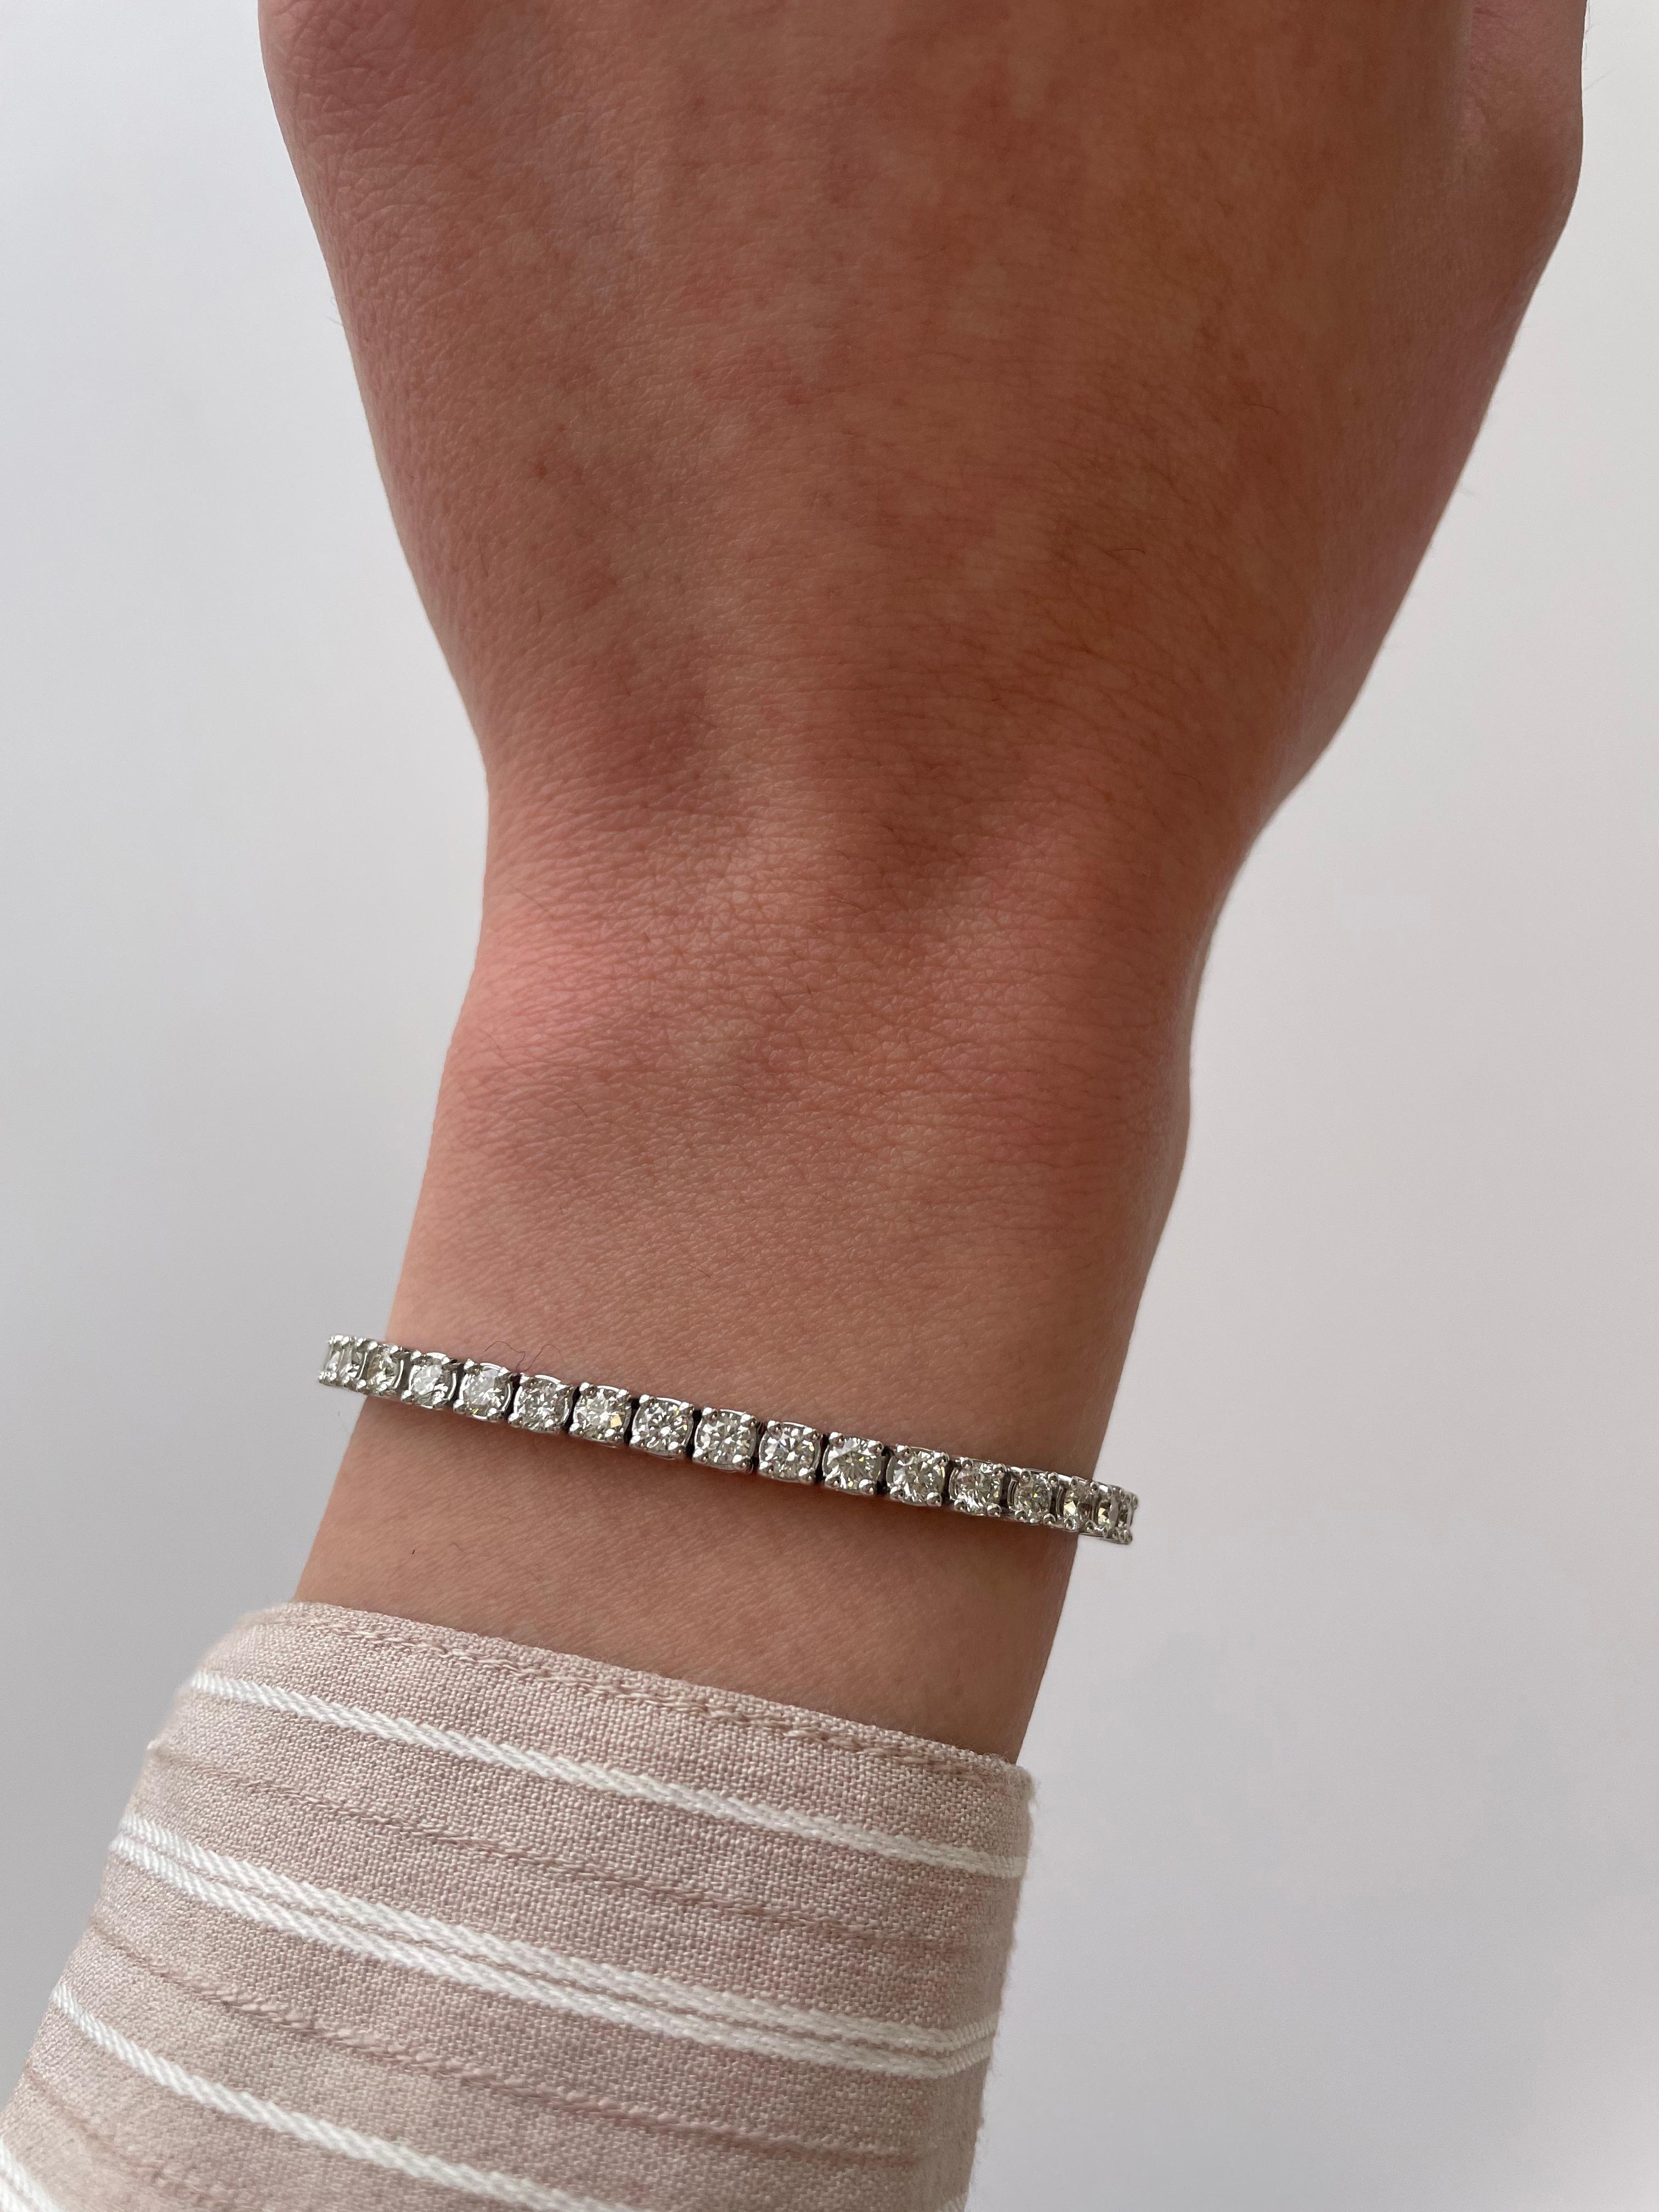 Exquisite and timeless diamonds tennis bracelet, by Alexander Beverly Hills.
49 round brilliant diamonds, 4.39 carats. Approximately H/I color and VVS2/VS1 clarity. Four prong set in 18k white gold, 15.06 grams, 7 inches. 
Accommodated with an